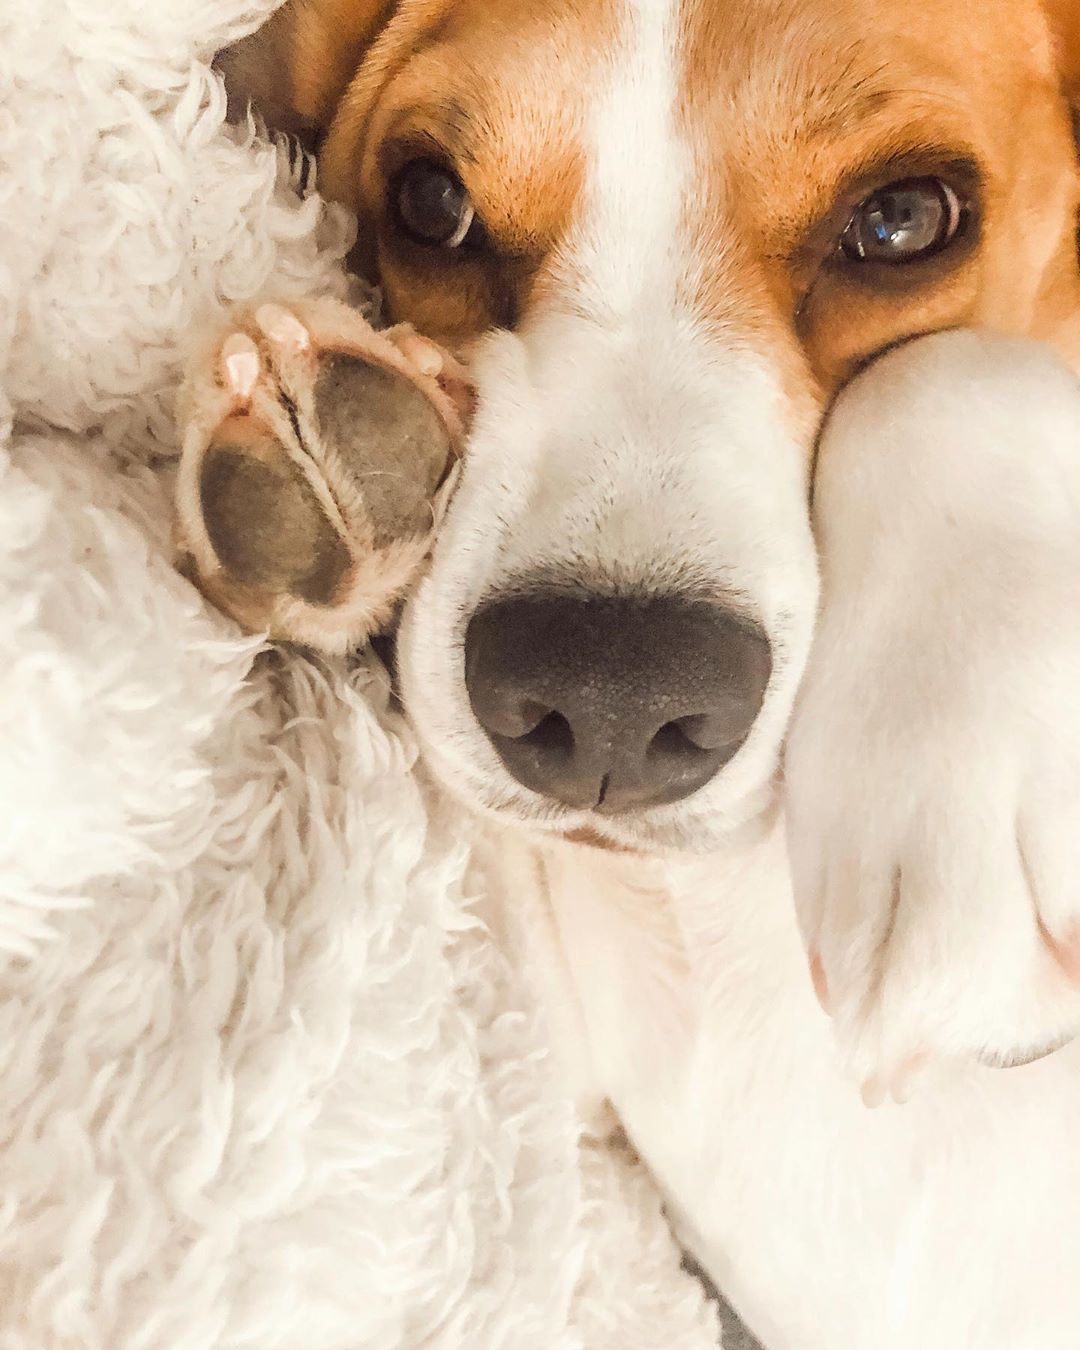 Beagle lying on the bed with both of its paws on the side of its face